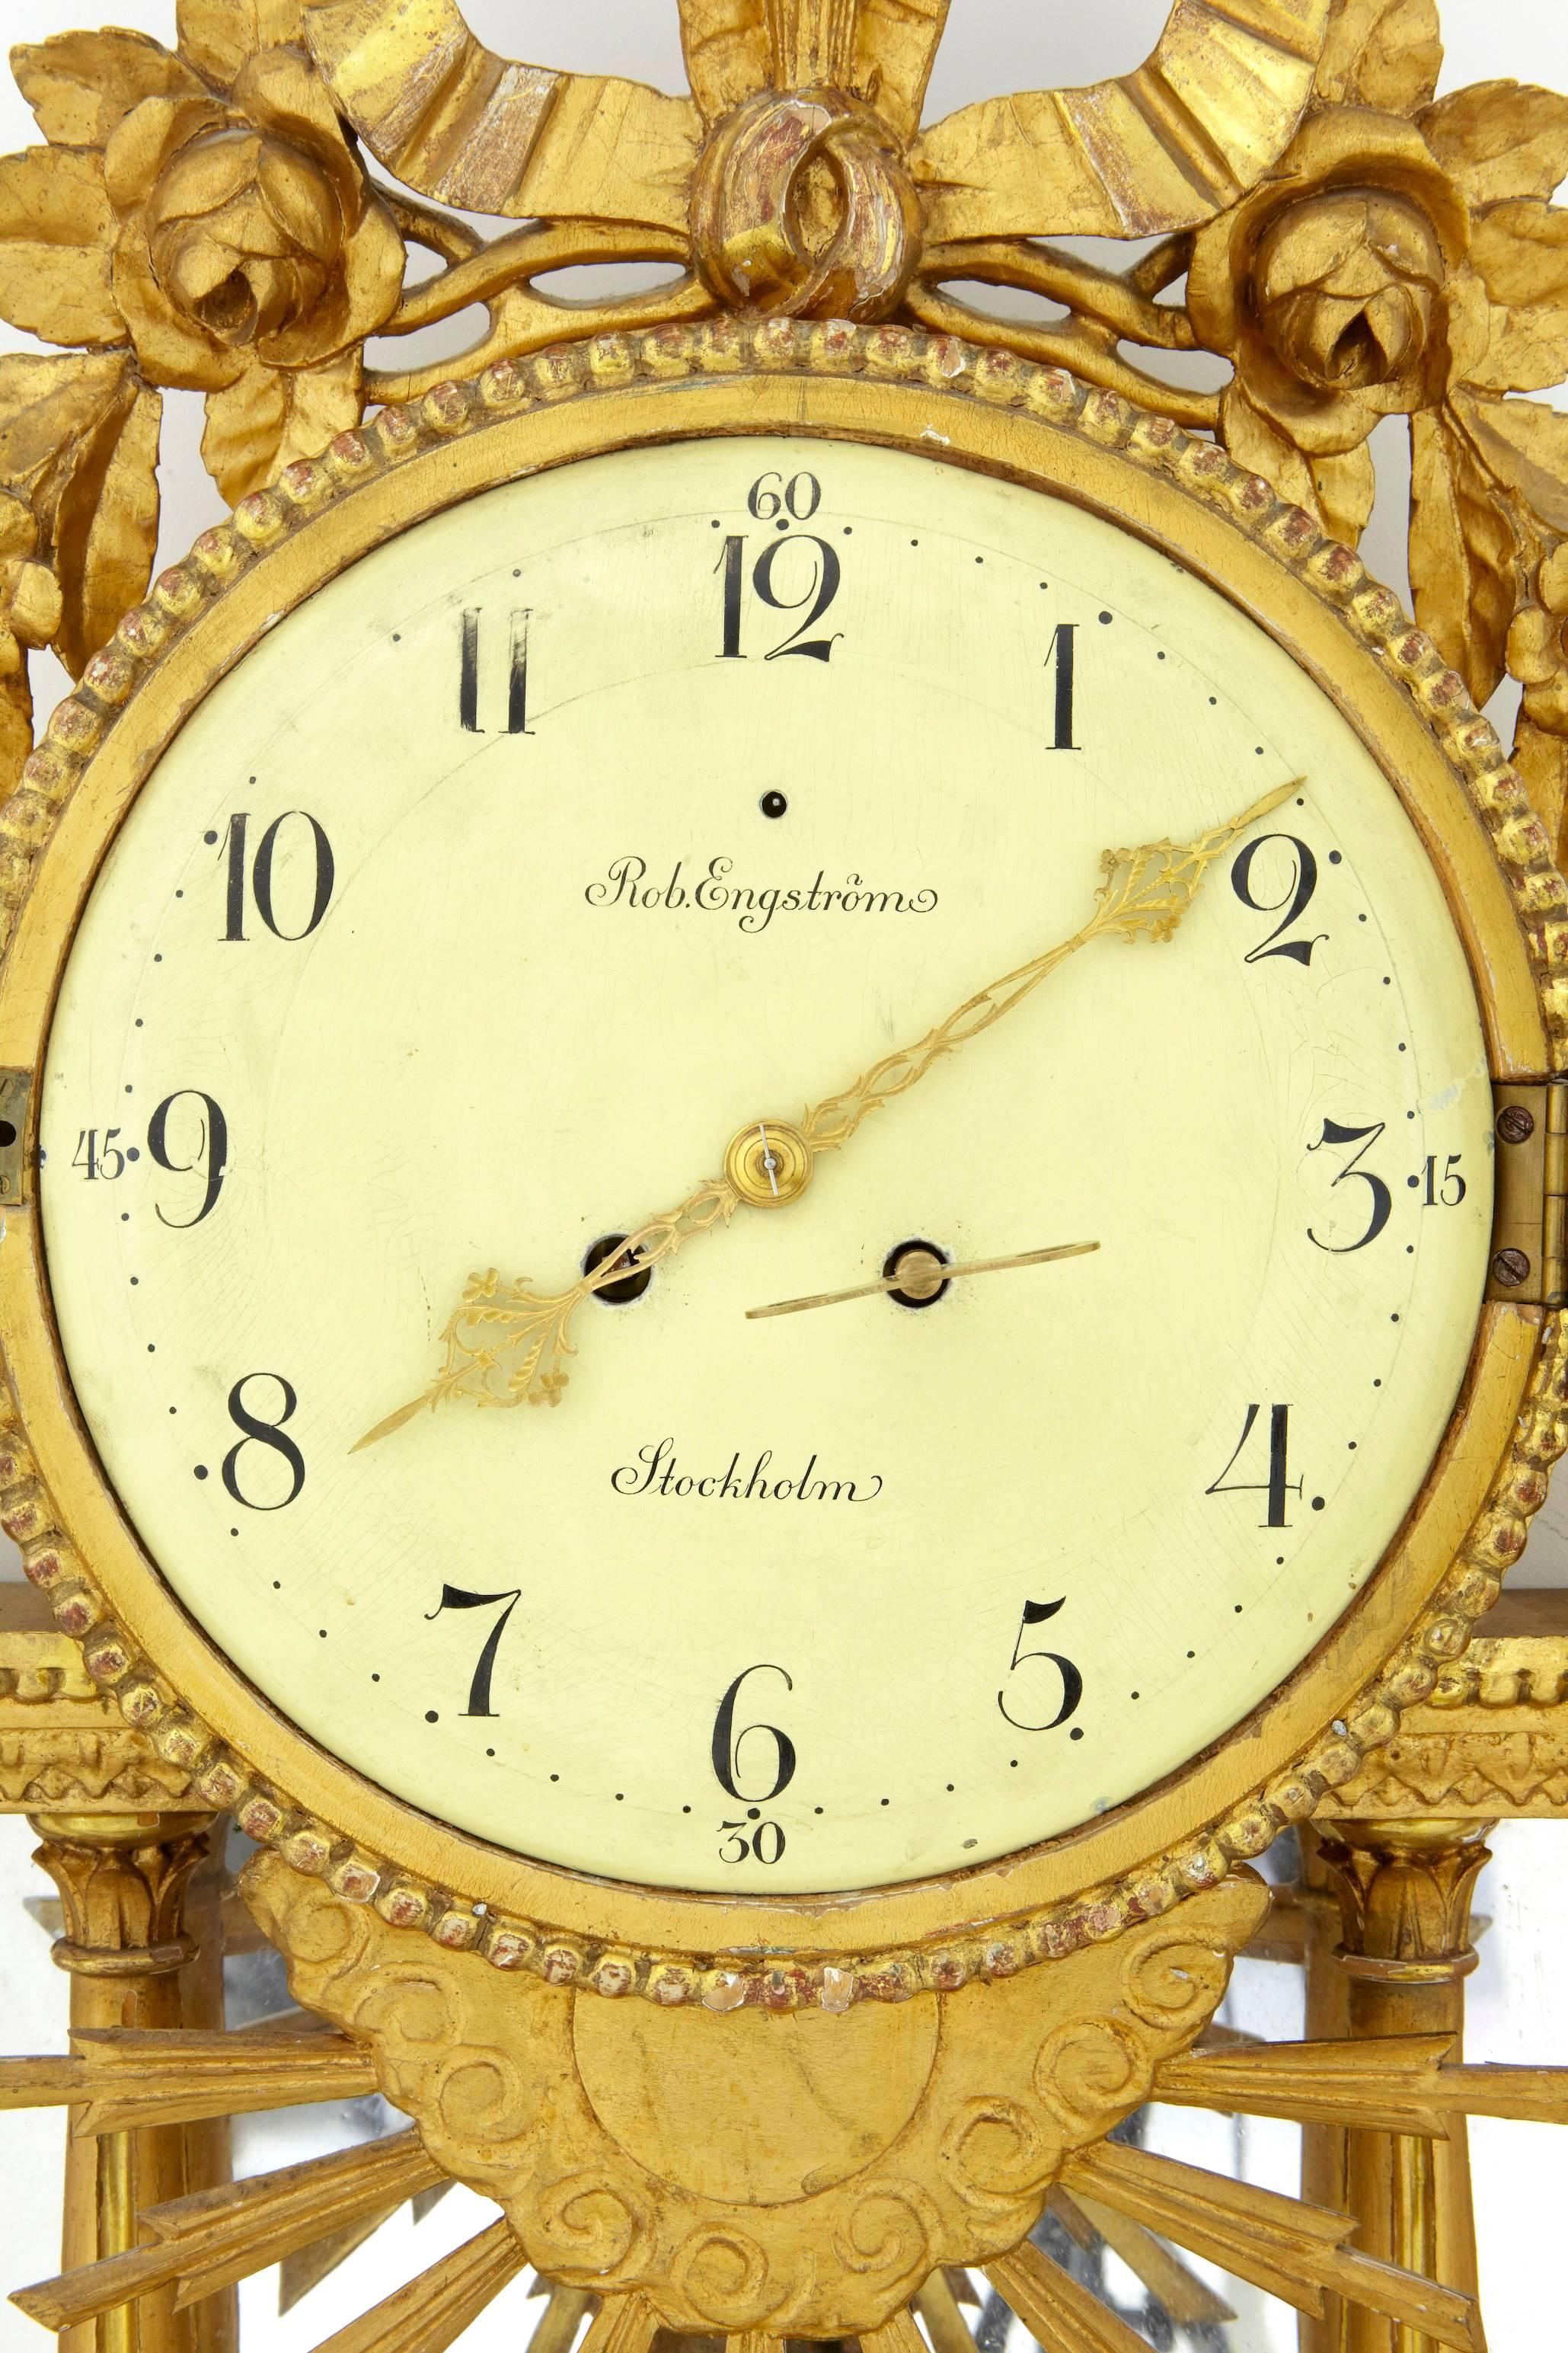 Fine quality Swedish wall clock in the empire taste, circa 1895.
Movement stamped b & w, which is by German Company Berger & Wurker. Clock by Rob Engstrom of Stockholm.
Rubbing and marks to clock face.
Slight gilt losses.

We recommend that